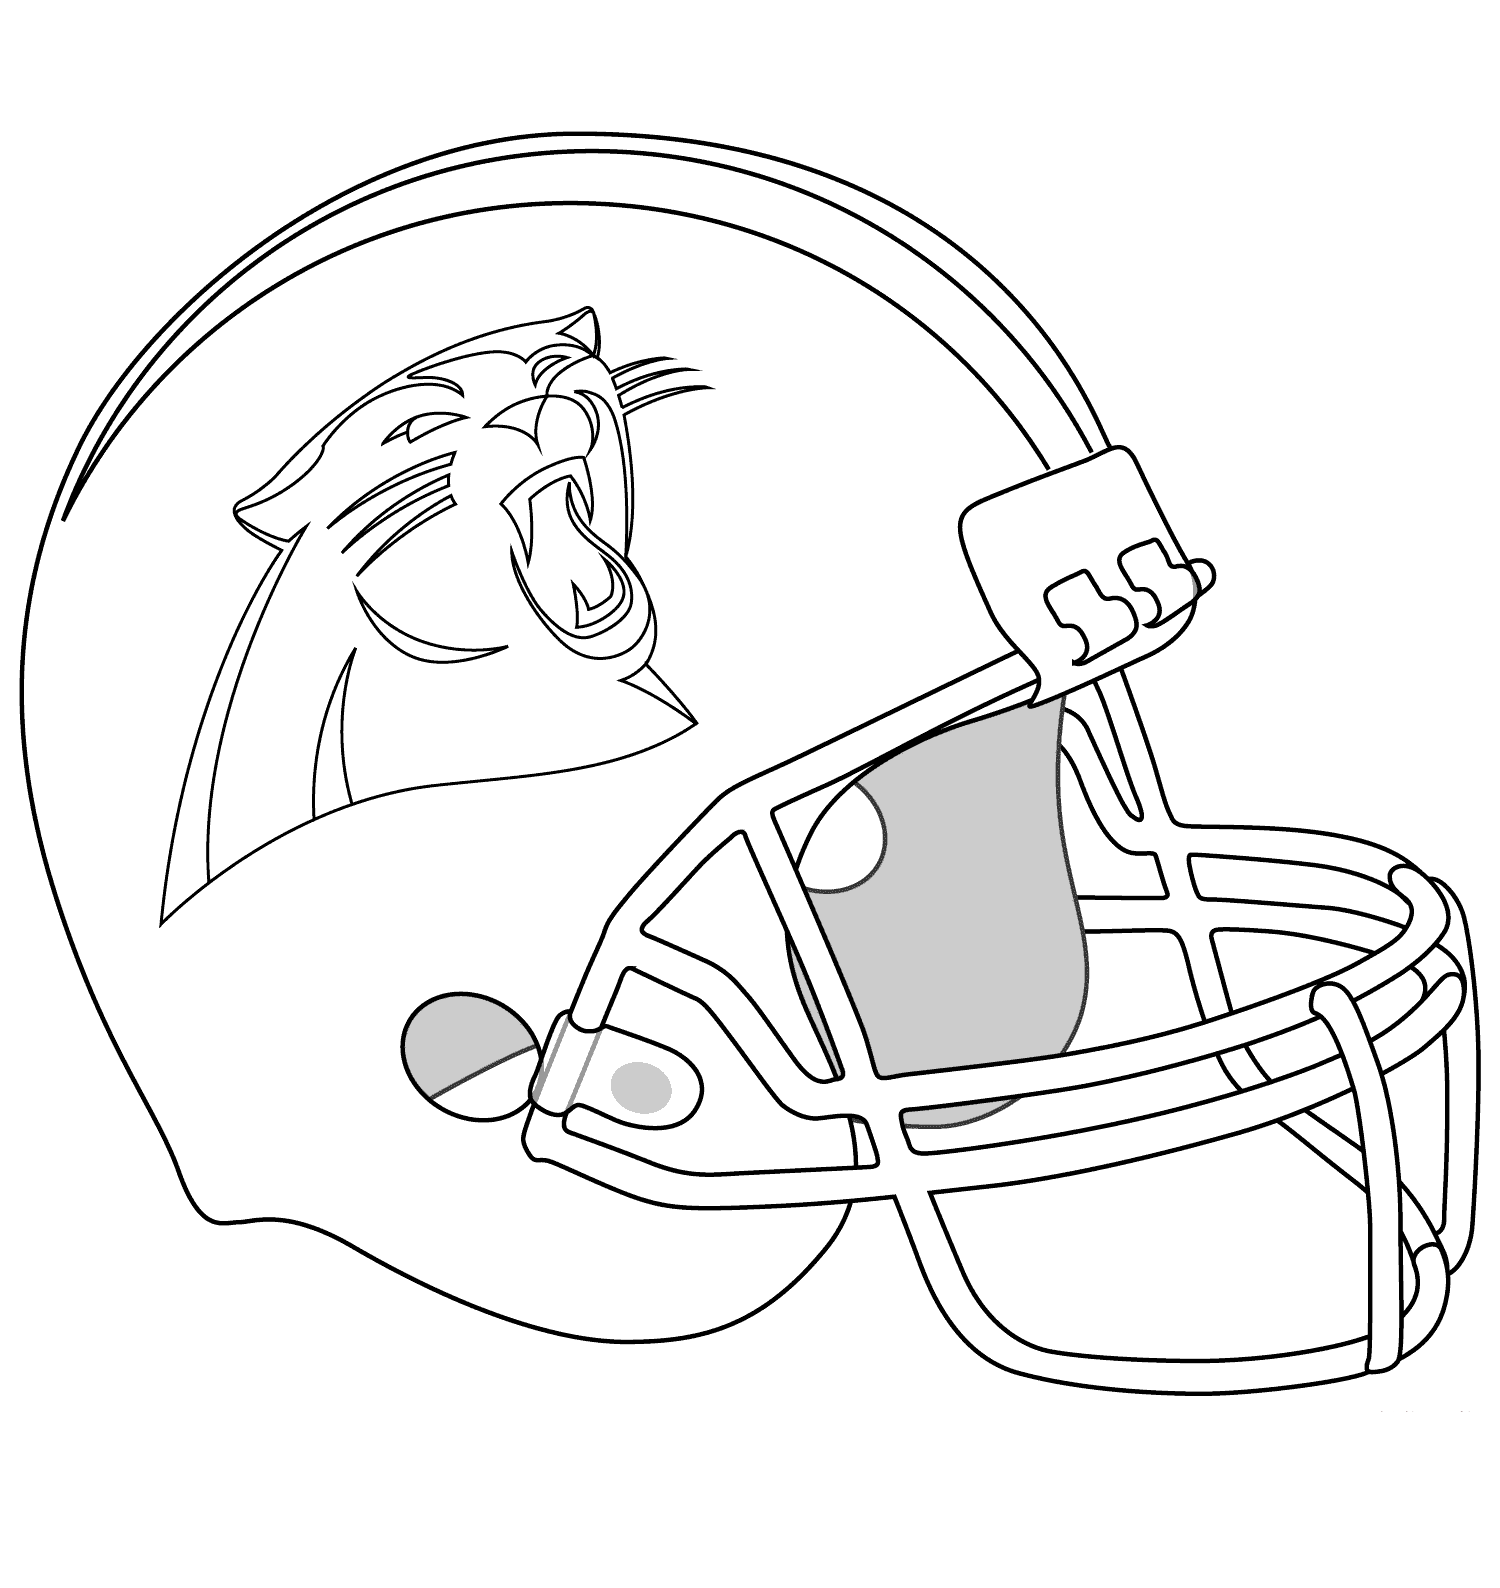 carolina panthers helmets coloring pages